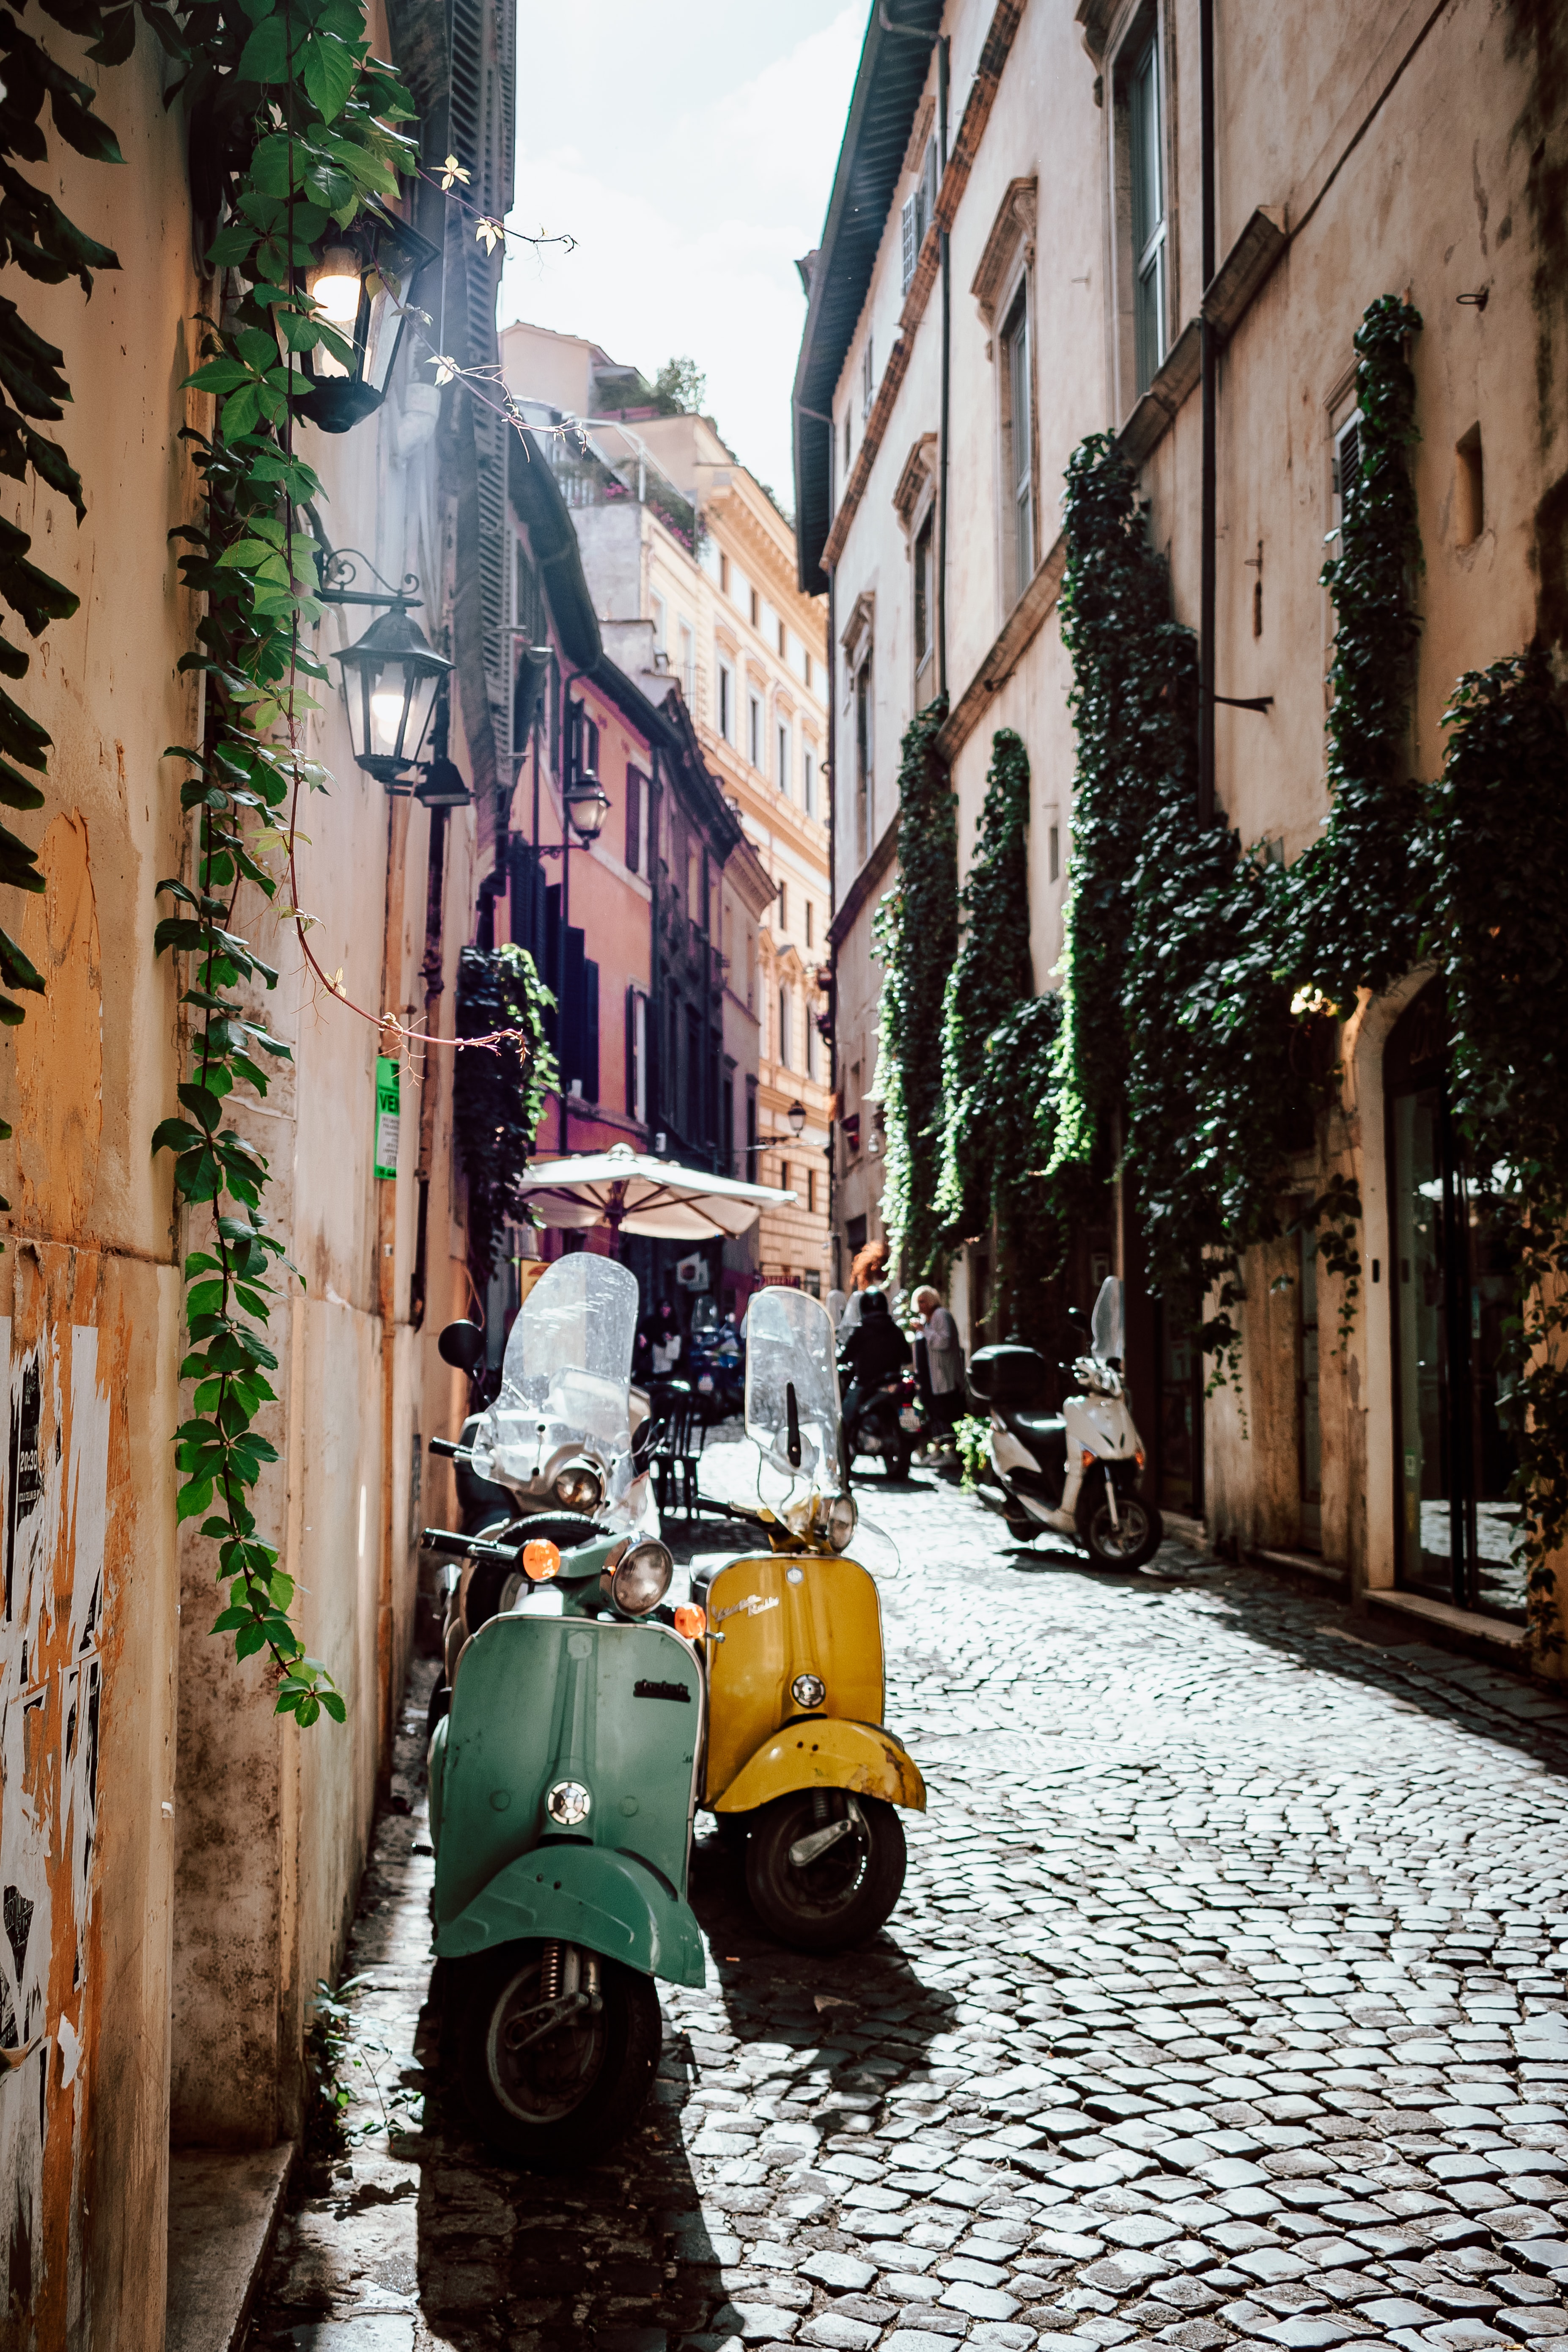 two vespas on a street in Rome